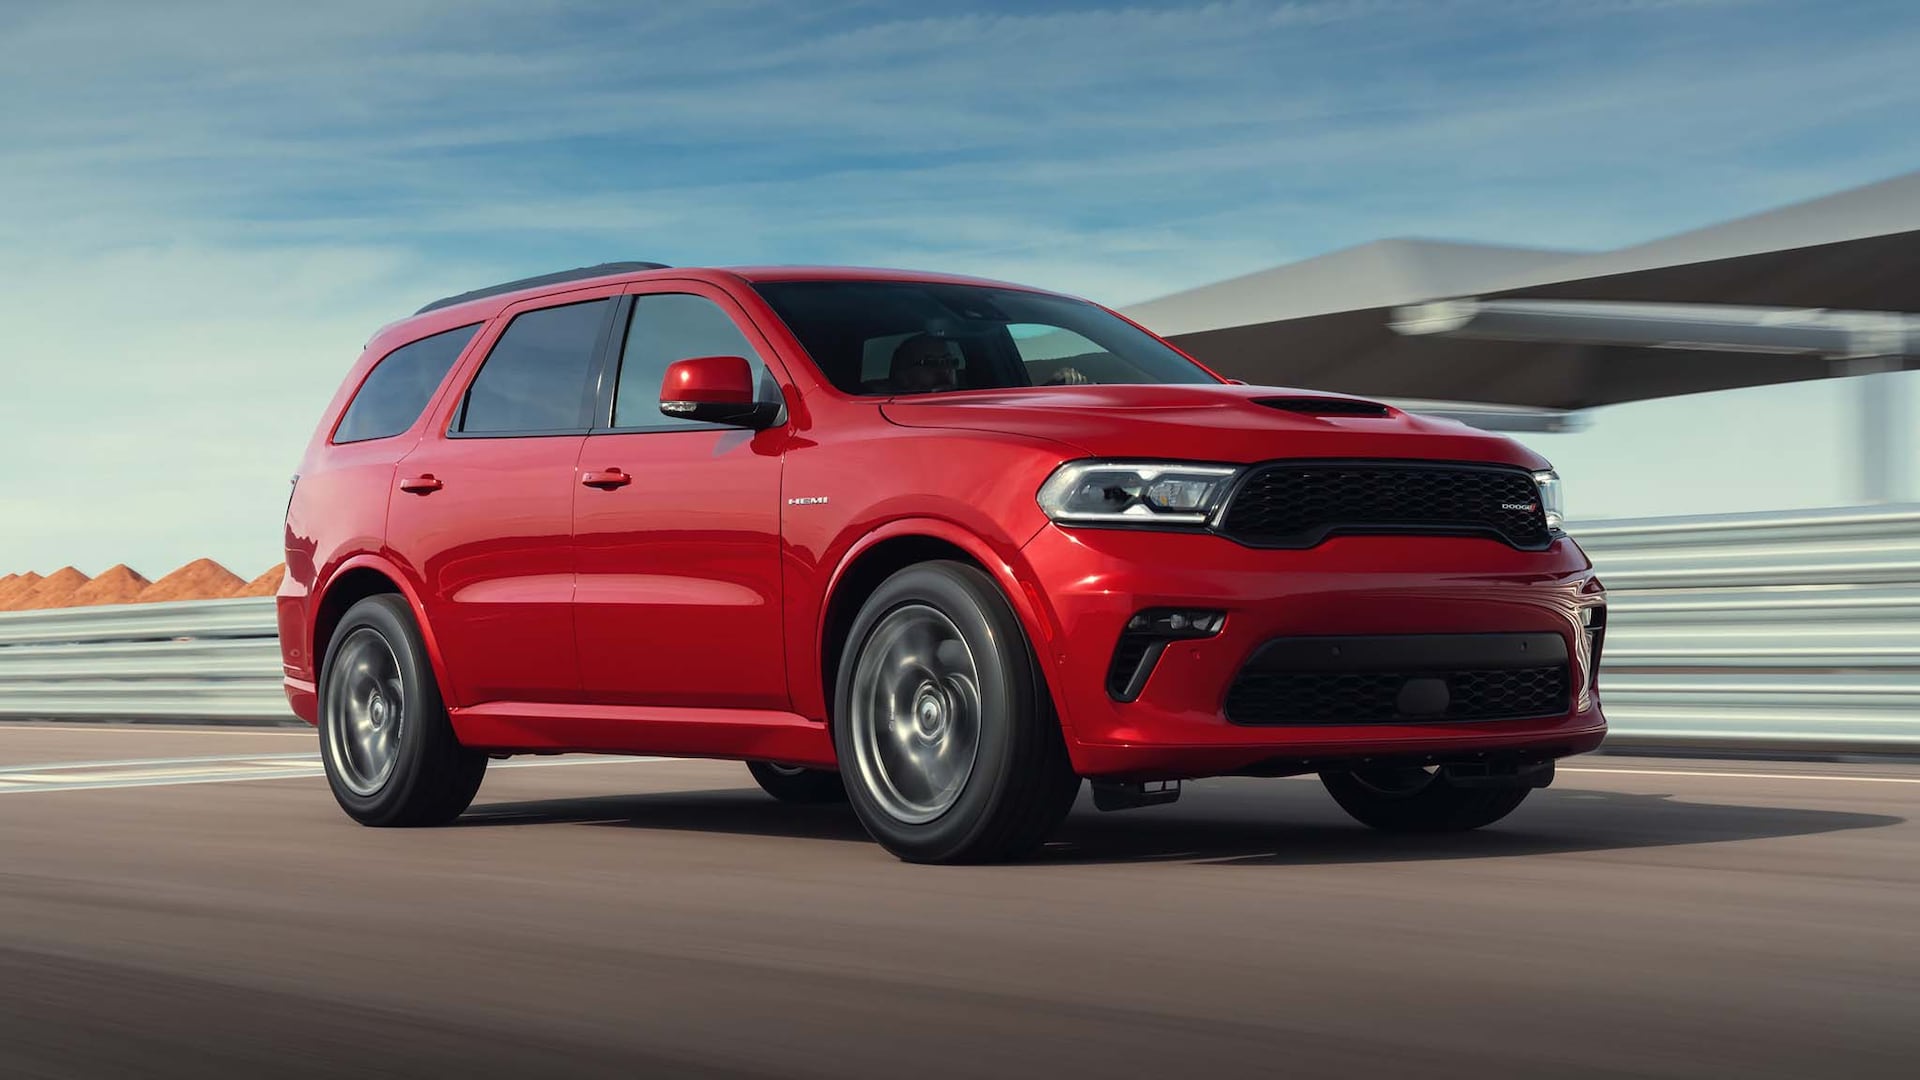 2021 Dodge Durango Prices, Reviews, and Photos - MotorTrend